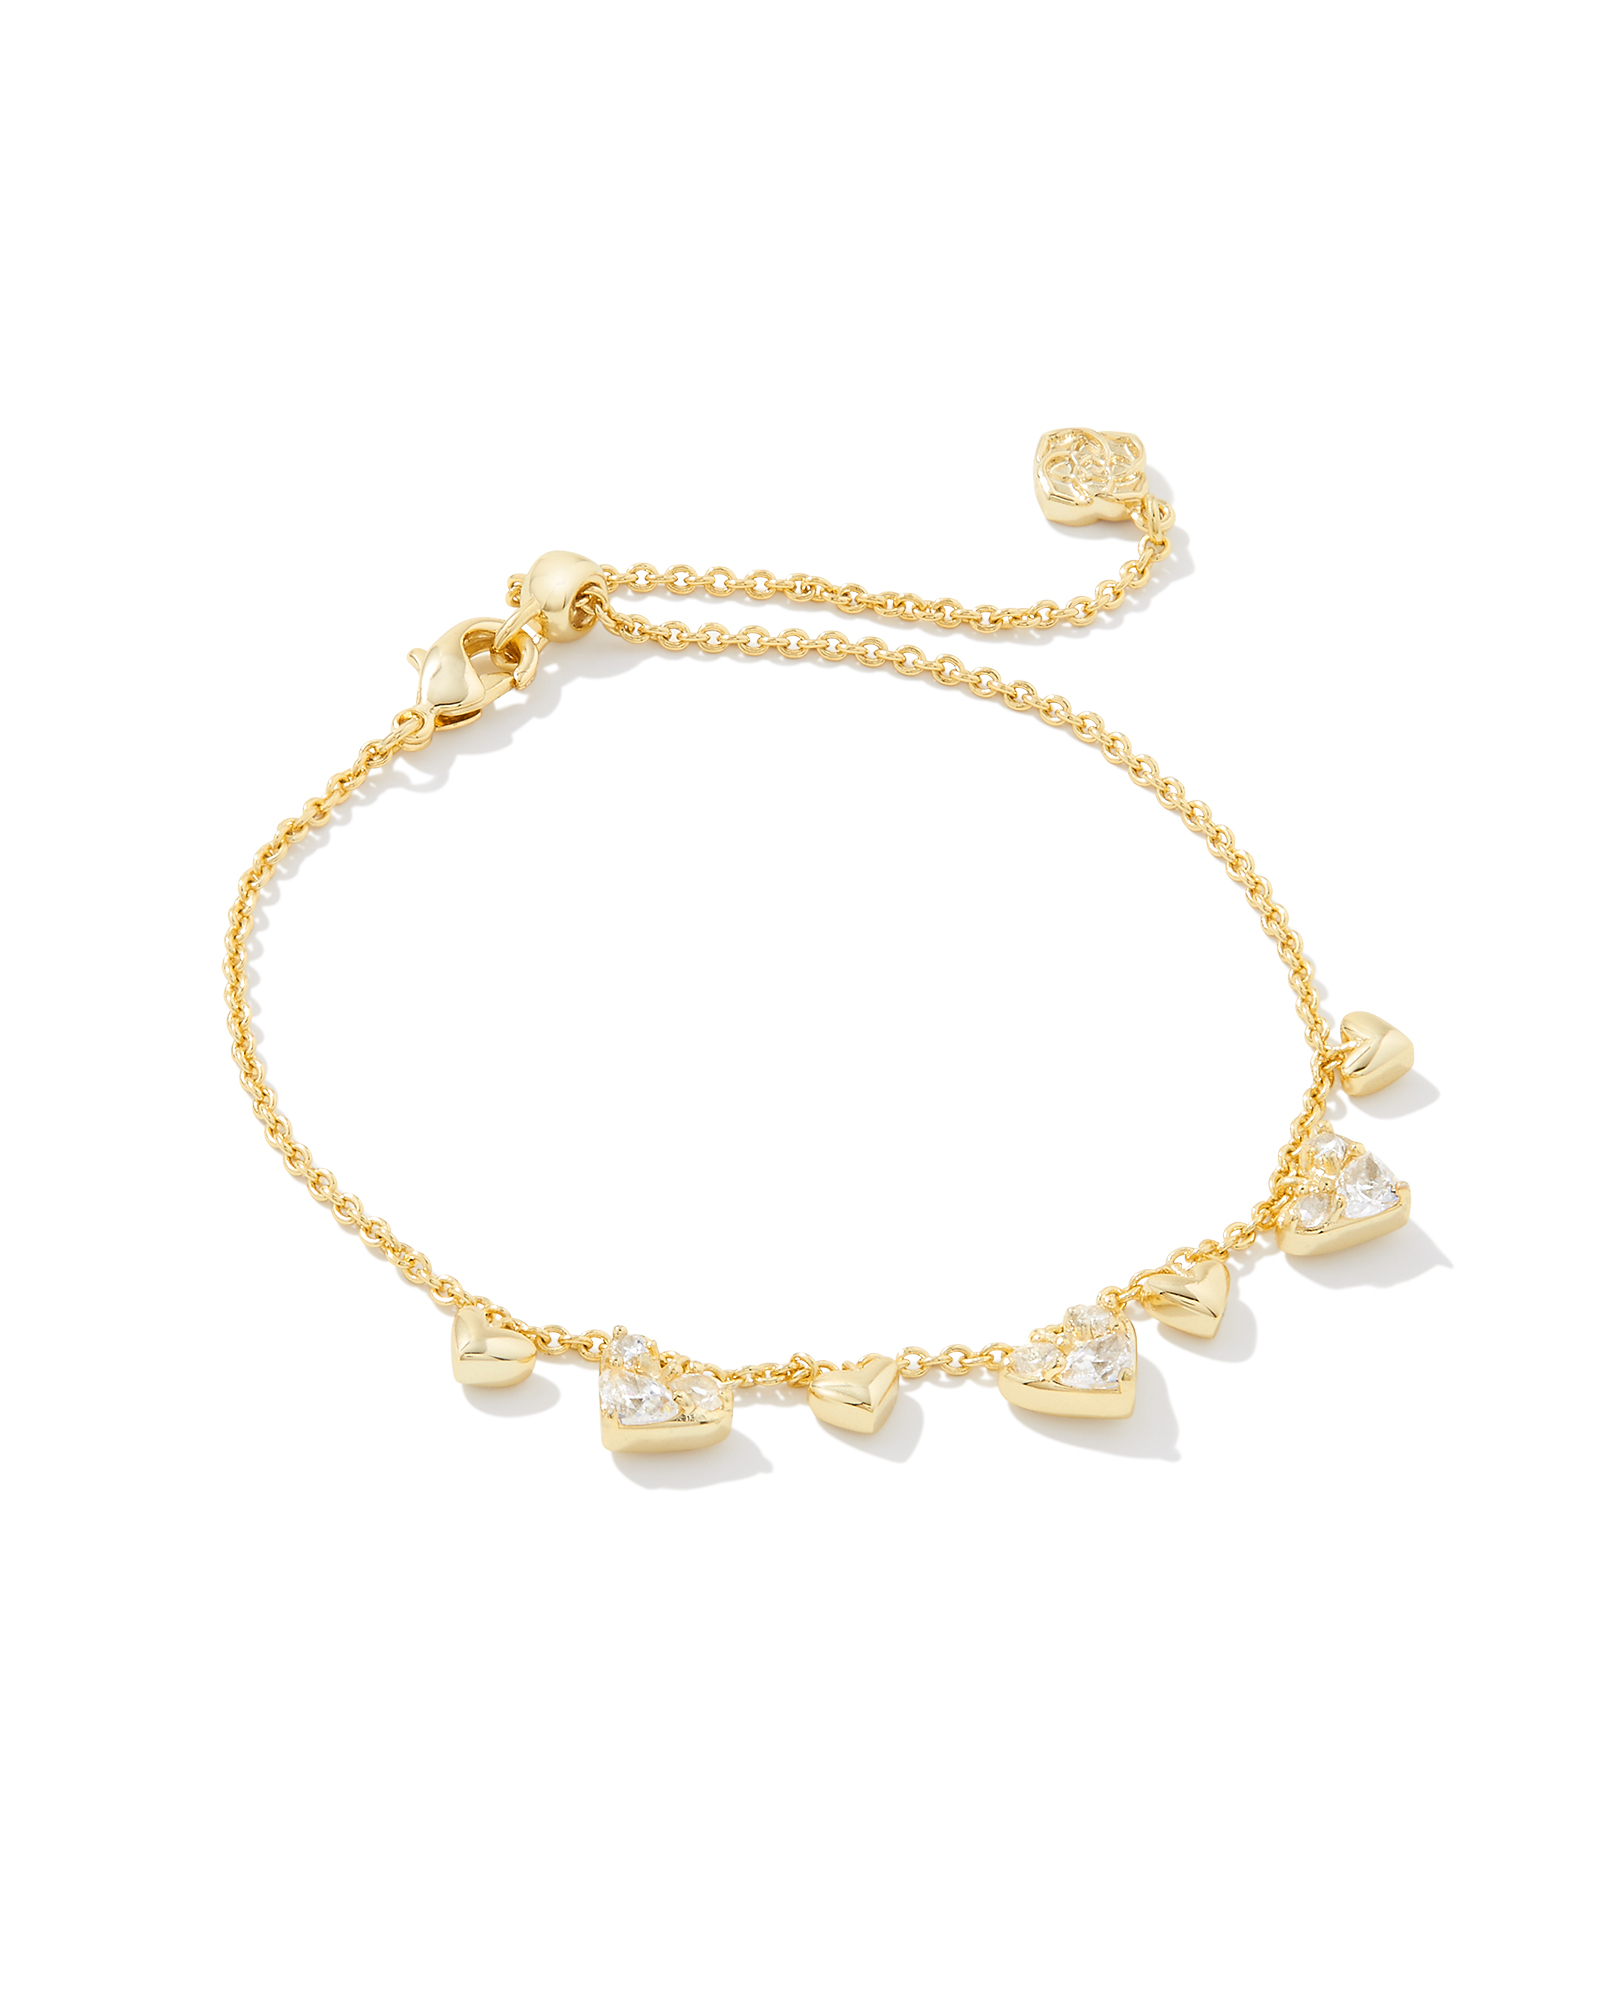 Kendra Scott - Haven Heart Strand Necklace in Gold Multi Mix at Nordstrom